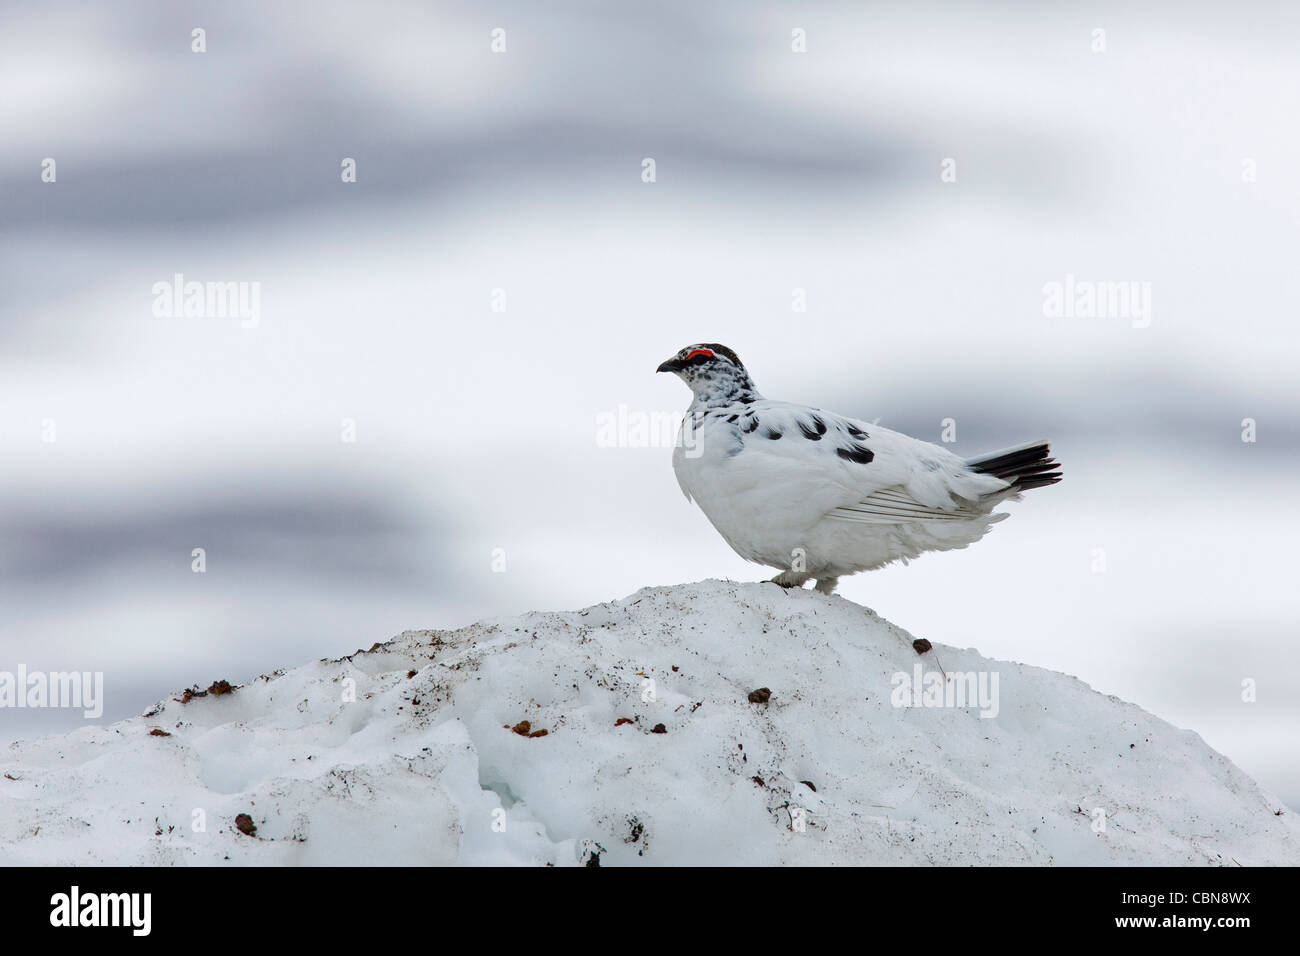 Willow ptarmigan / Willow grouse (Lagopus lagopus) male in spring plumage in the snow, Sweden Stock Photo